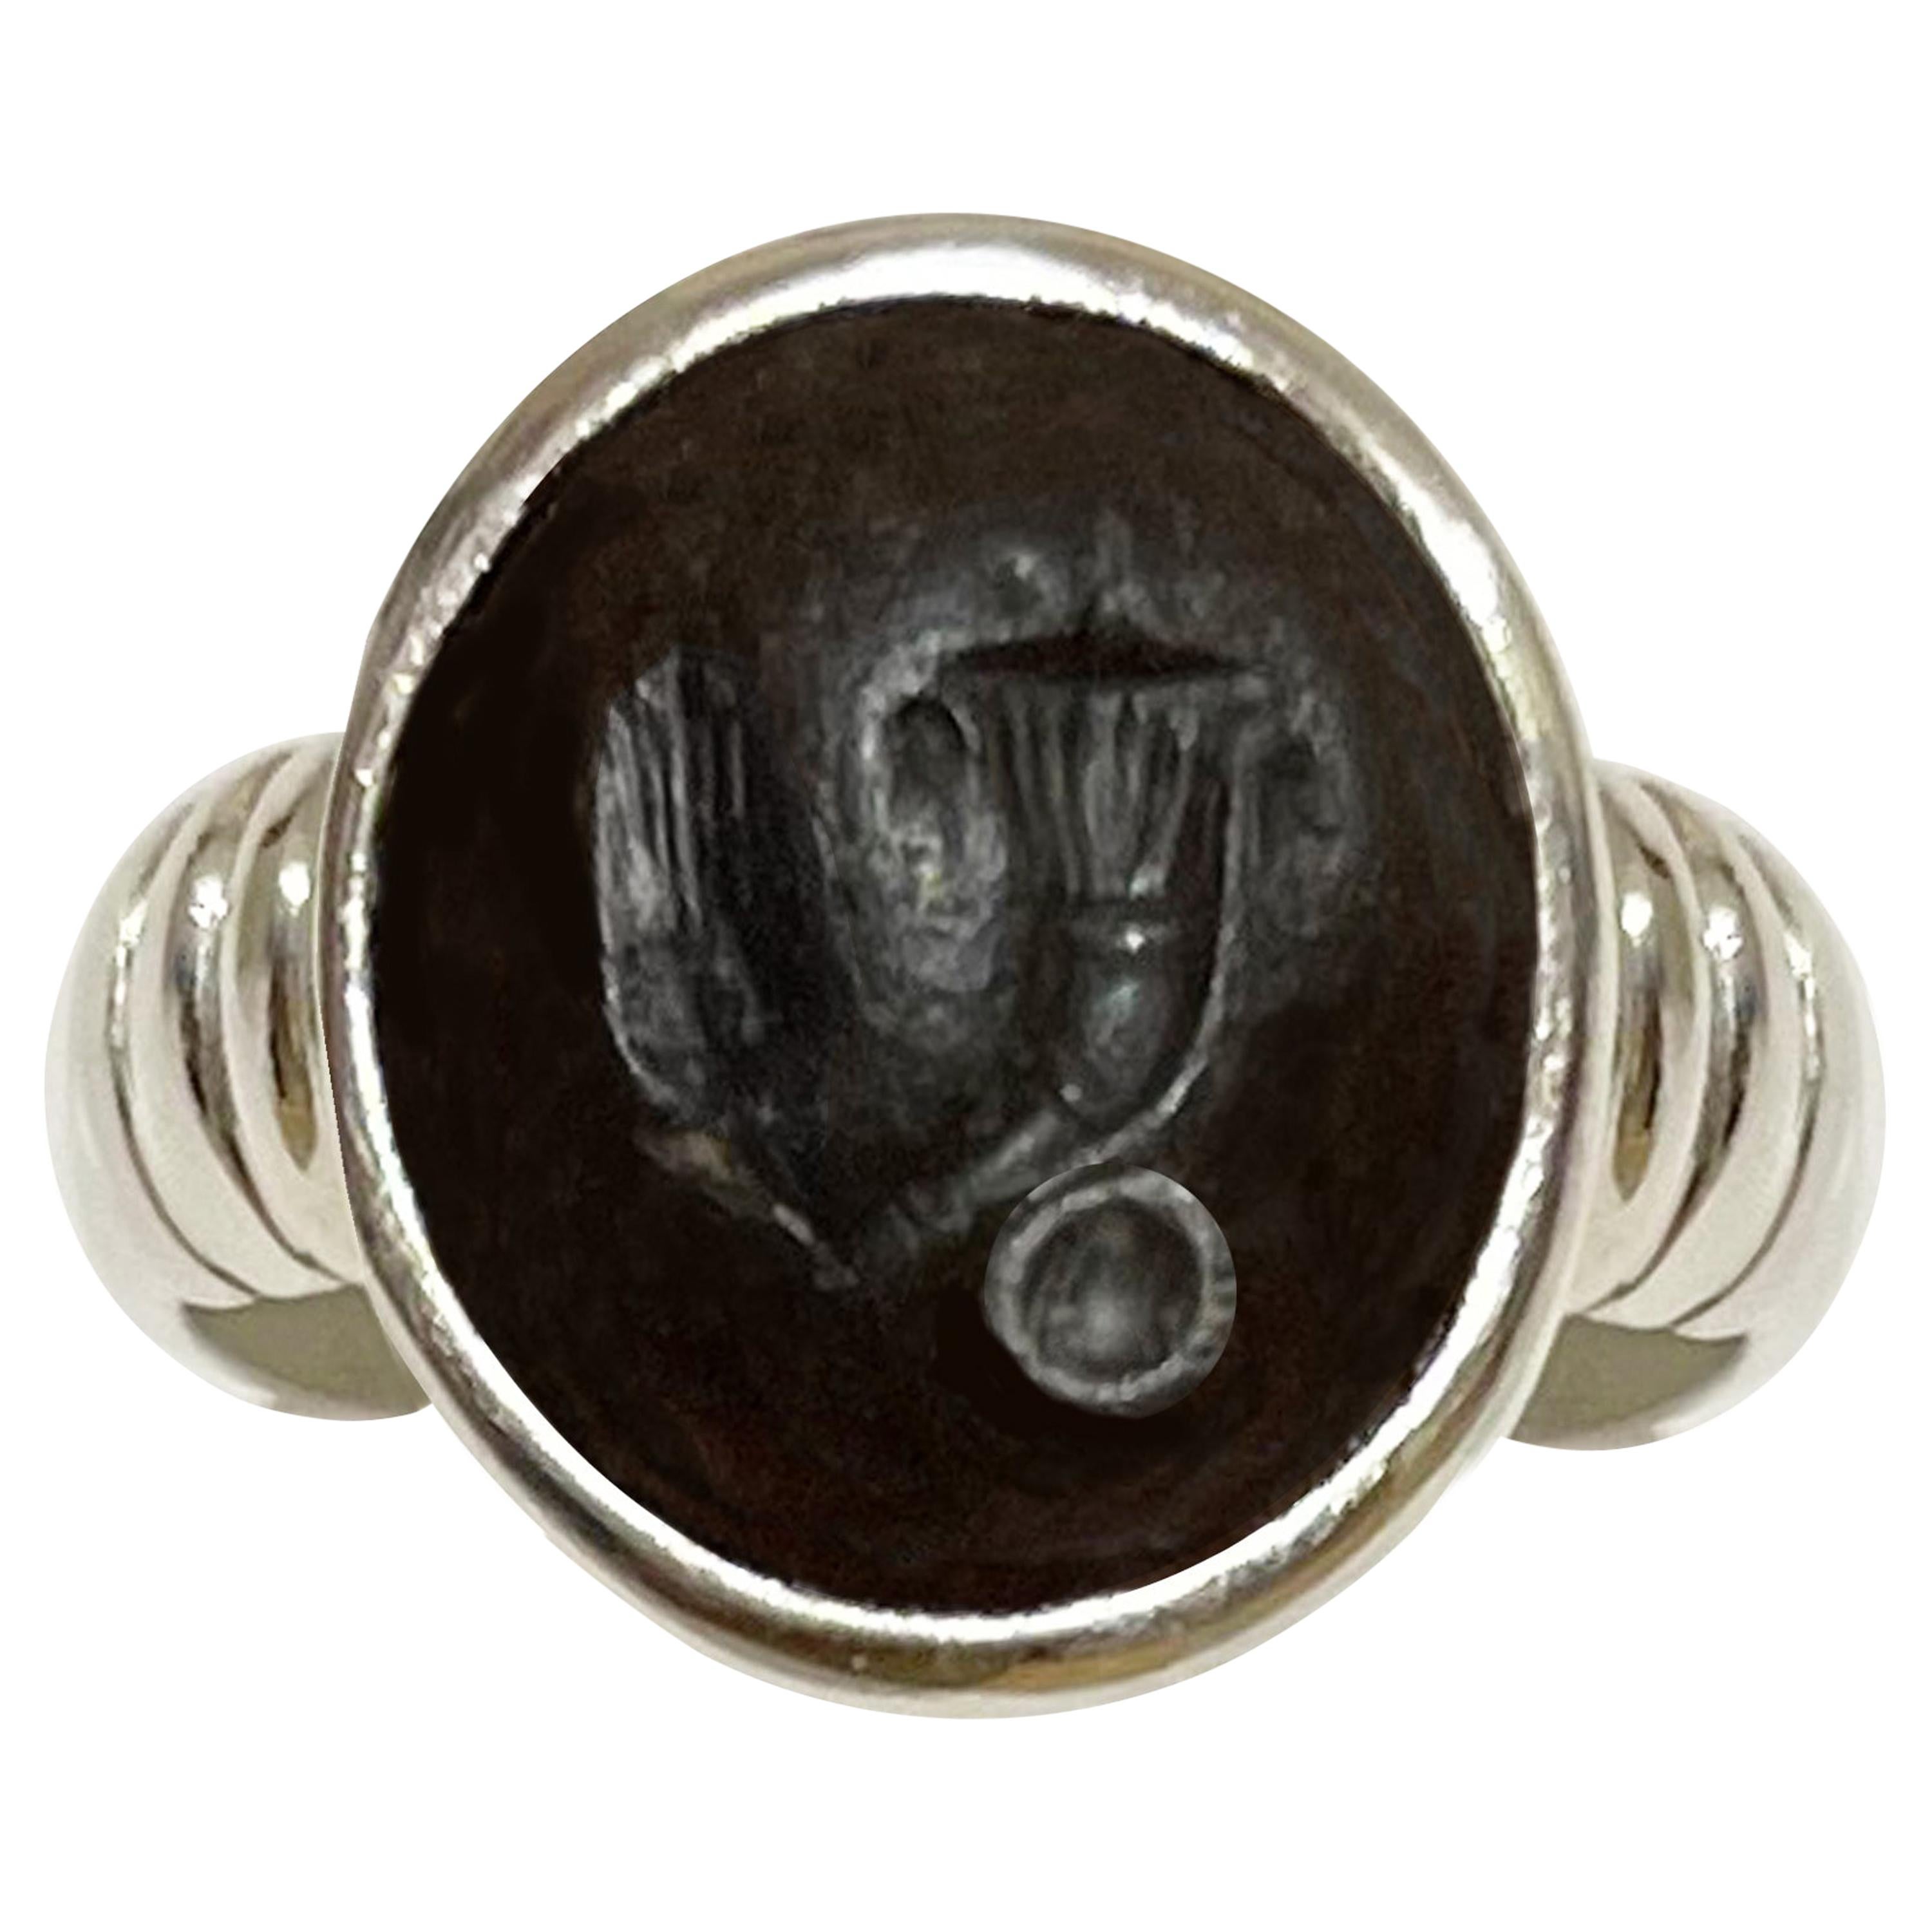 Roman Intaglio on Agate Sterling Silver Ring Depicting Horn of Plenty and an Ear